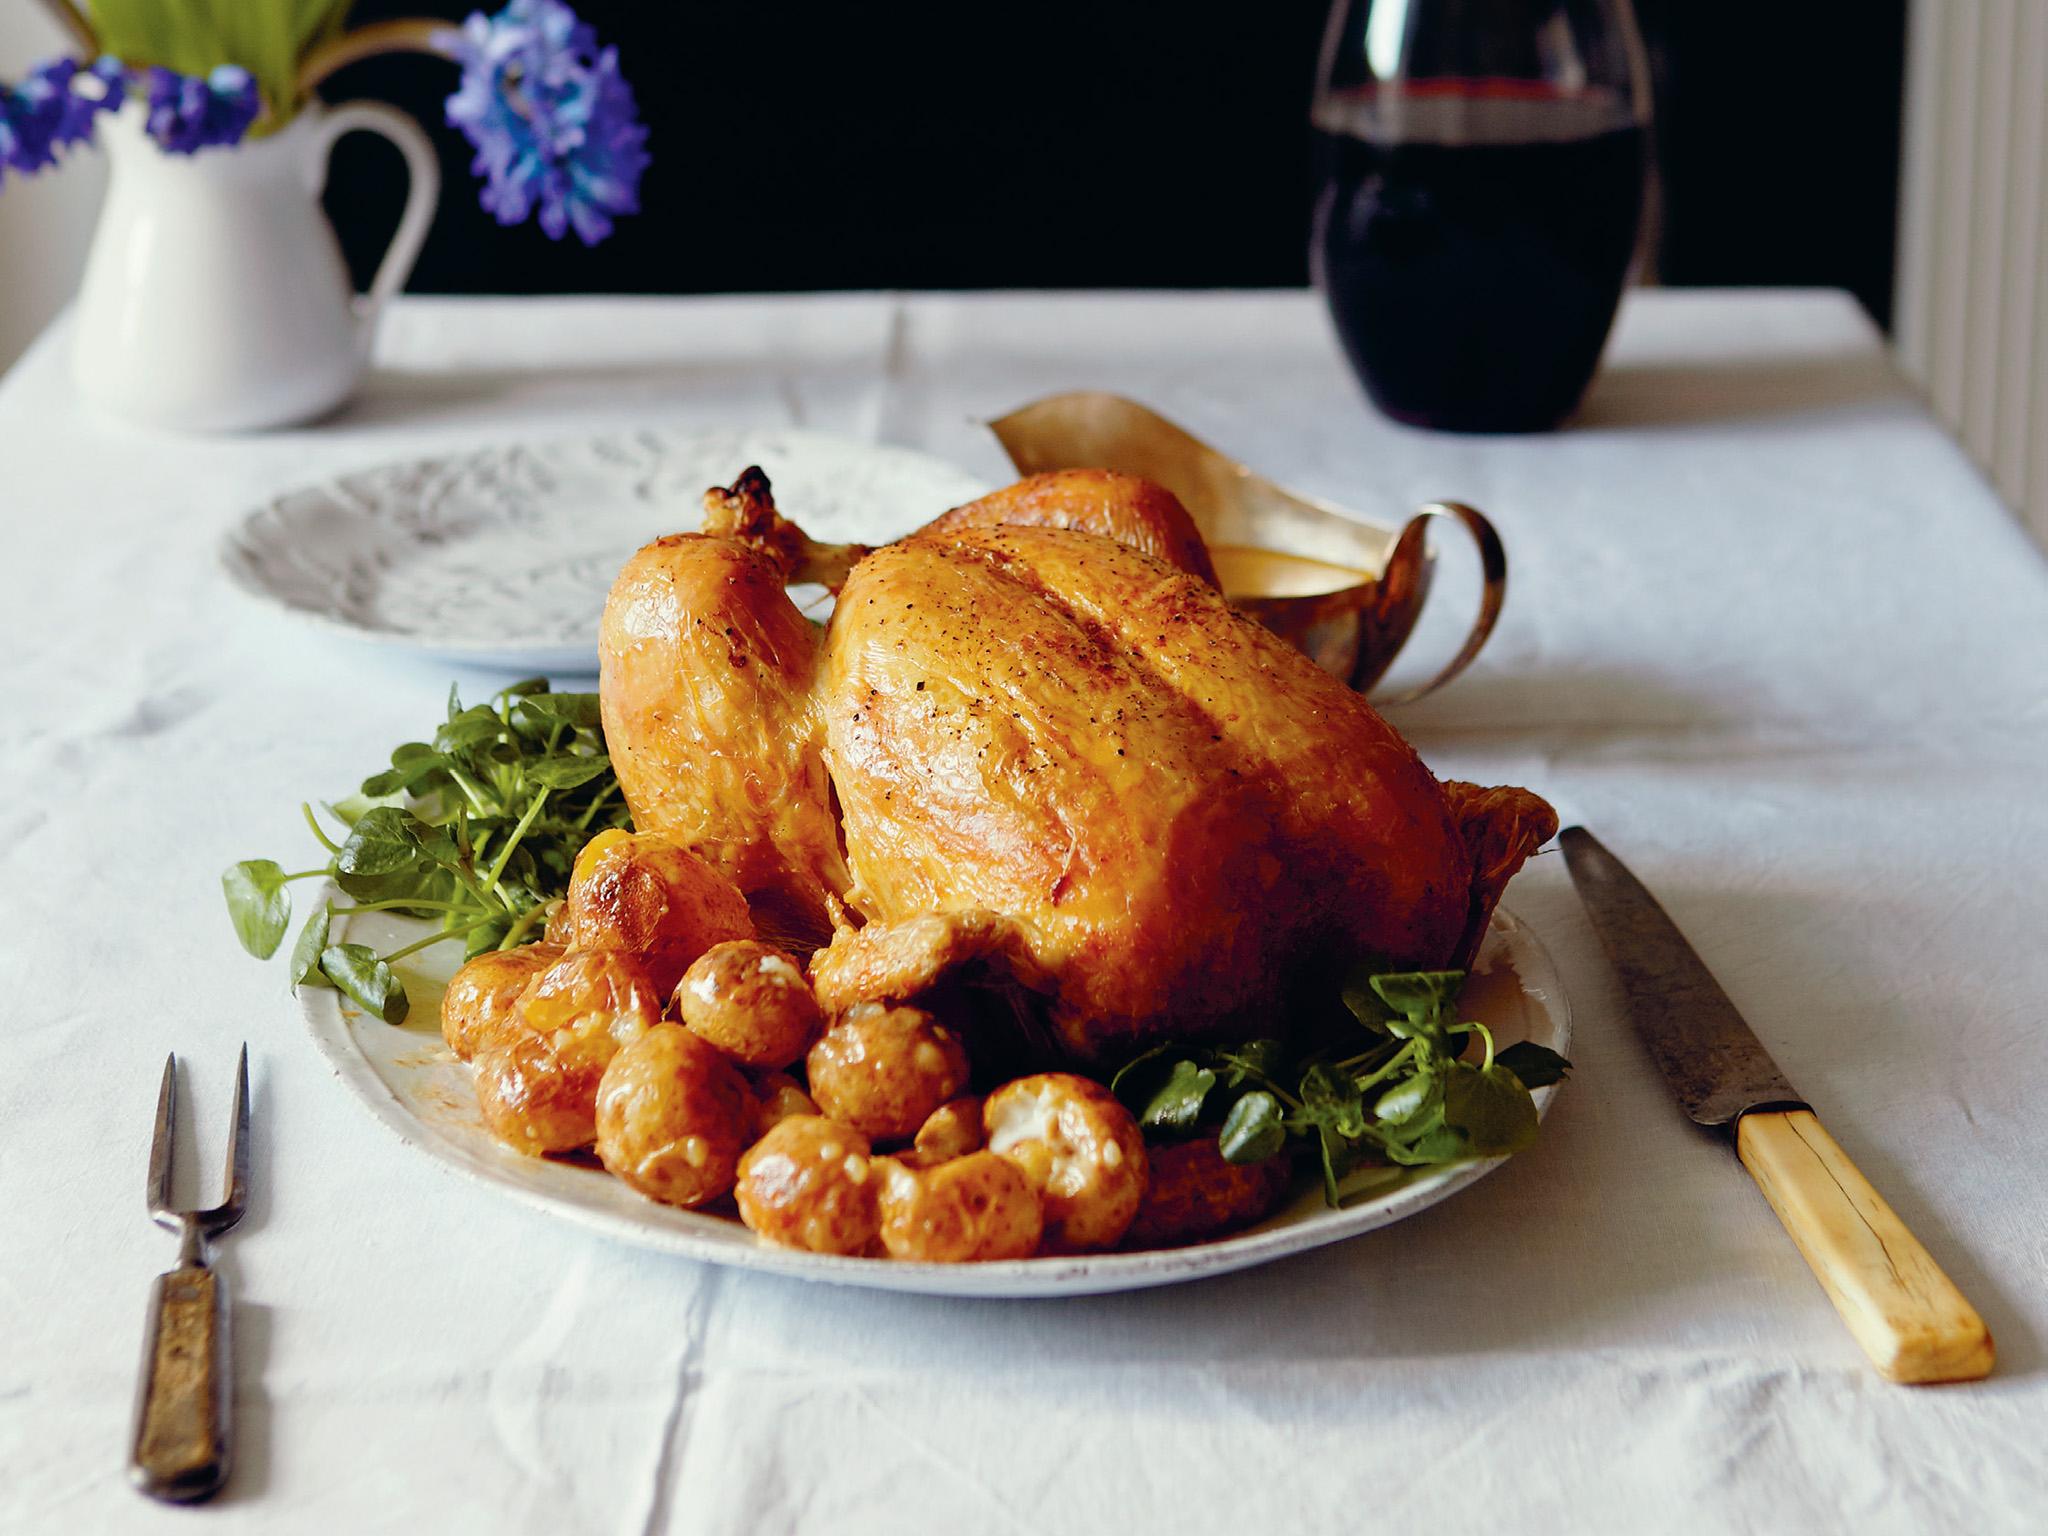 The roast chicken: It’s such a clever, versatile and crowd-pleasing thing